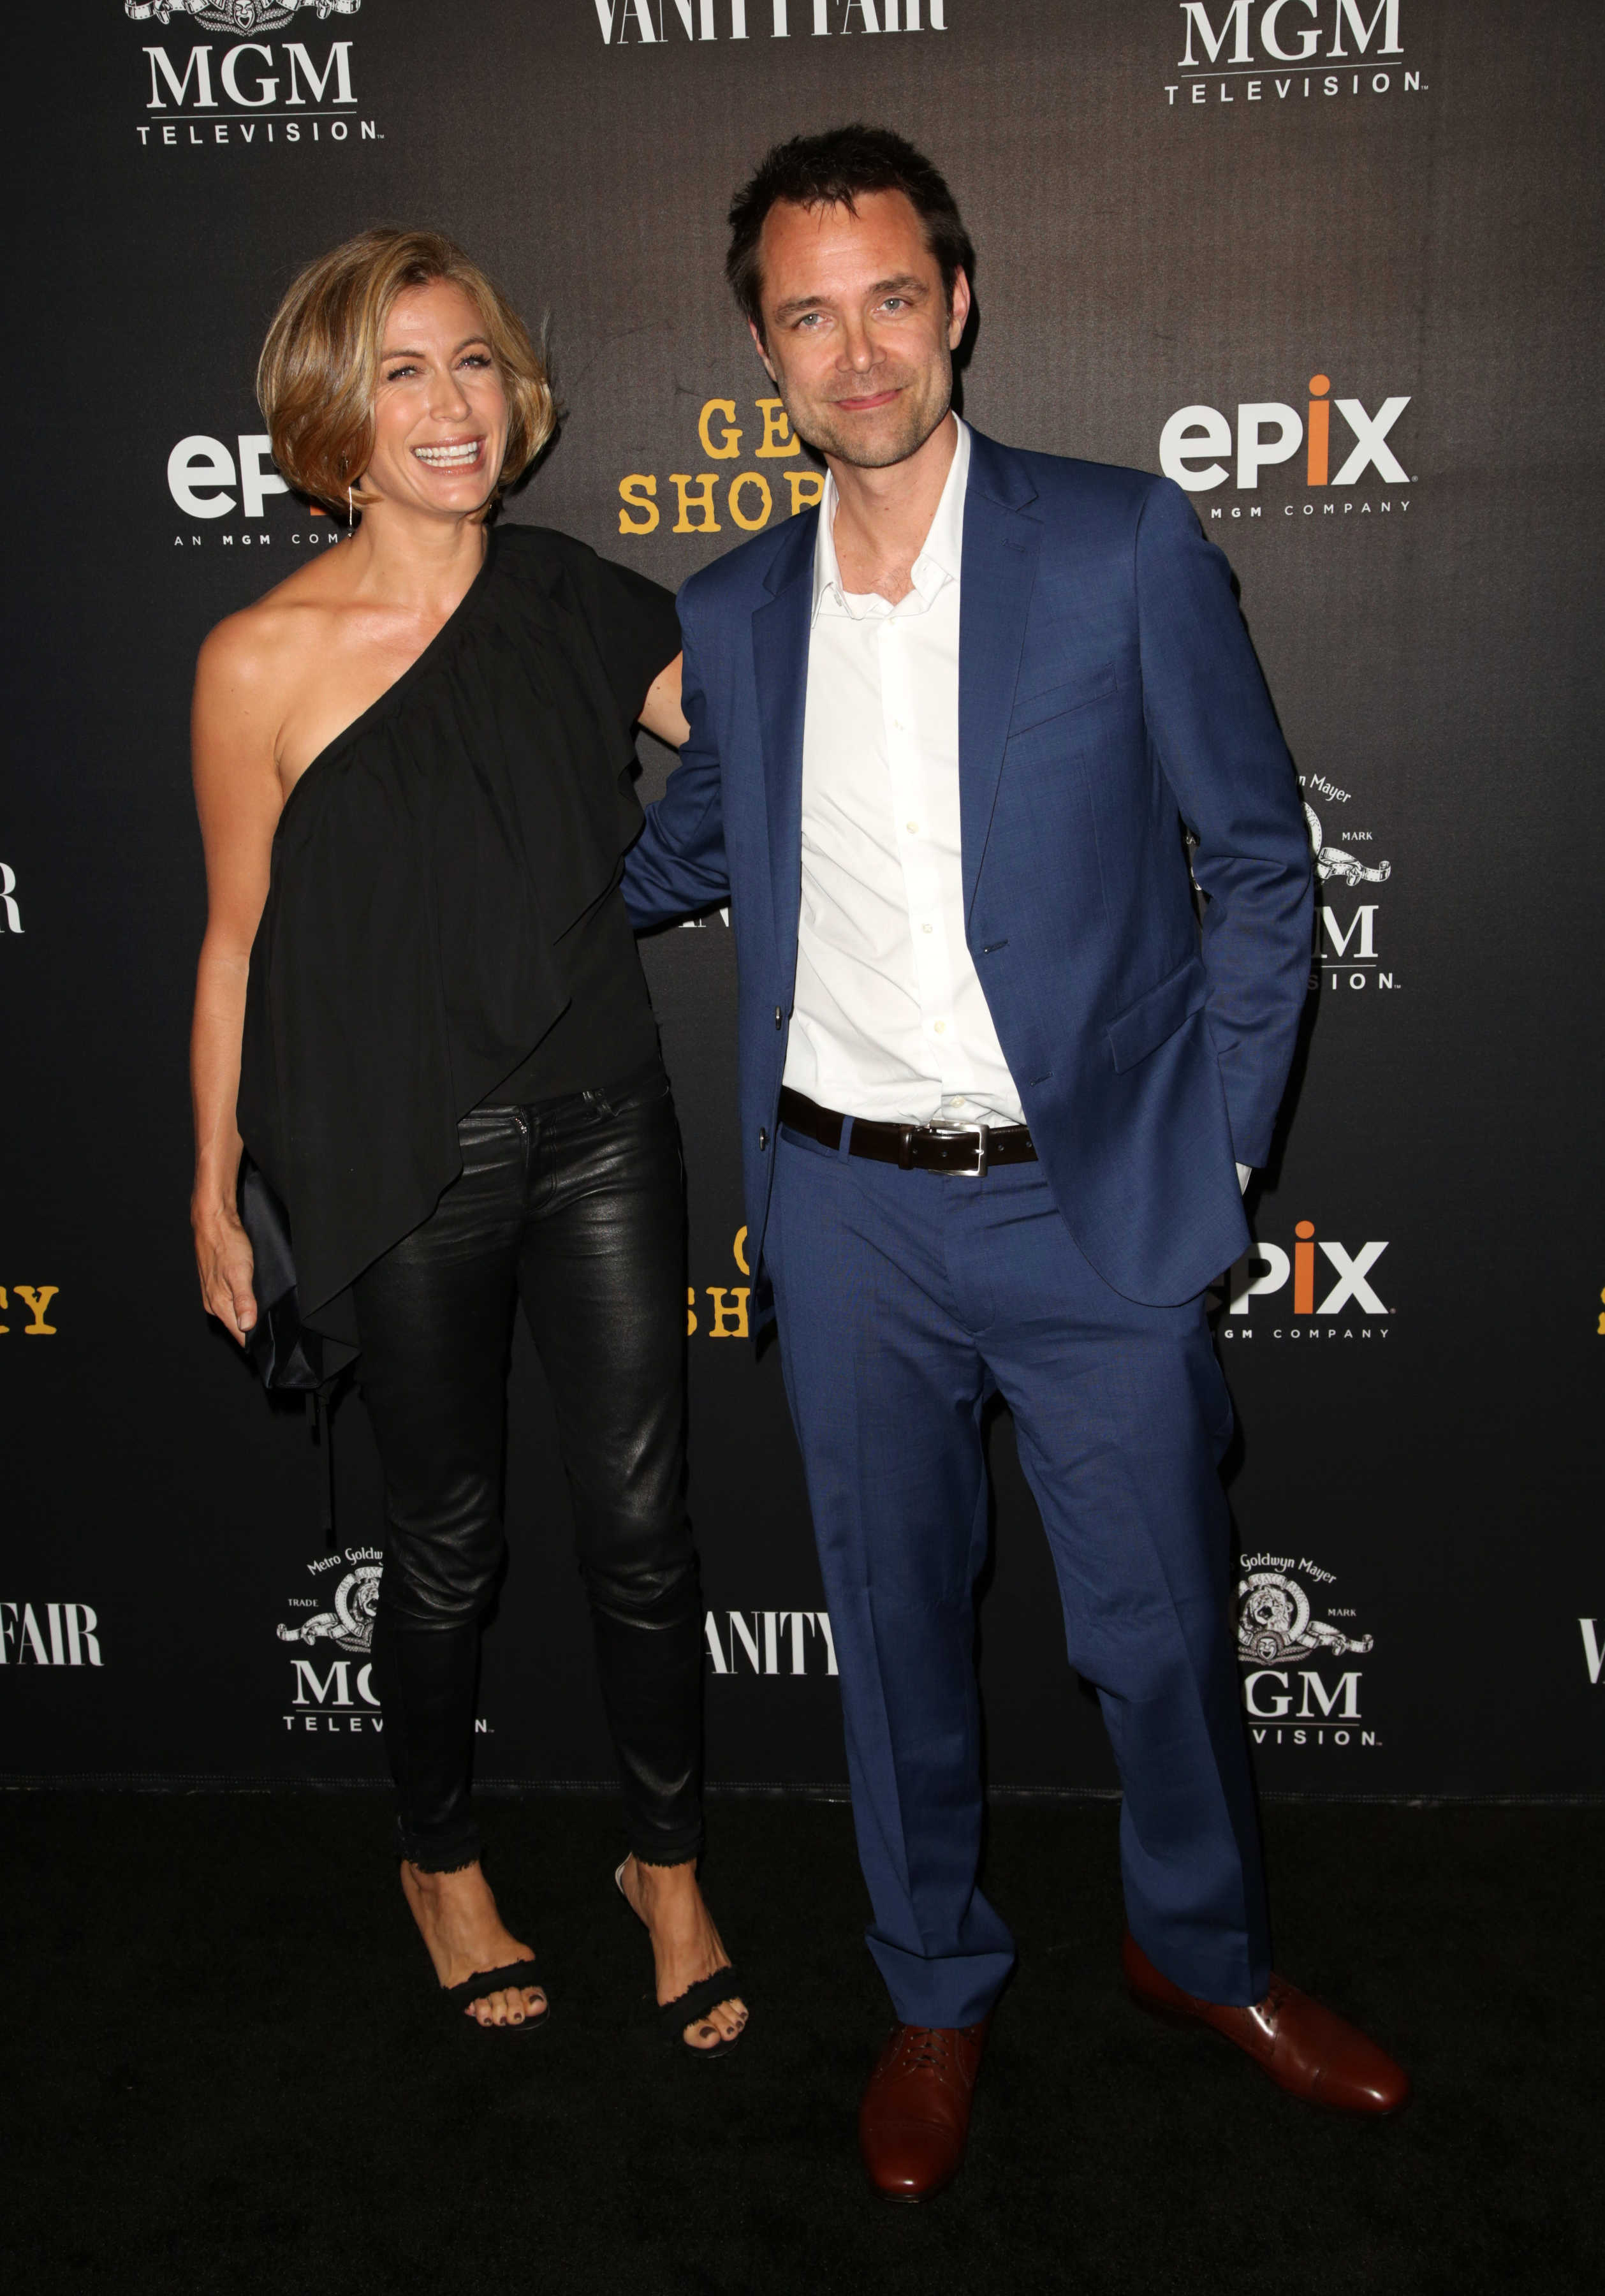 Sonya Walger at the premiere of Get Shorty